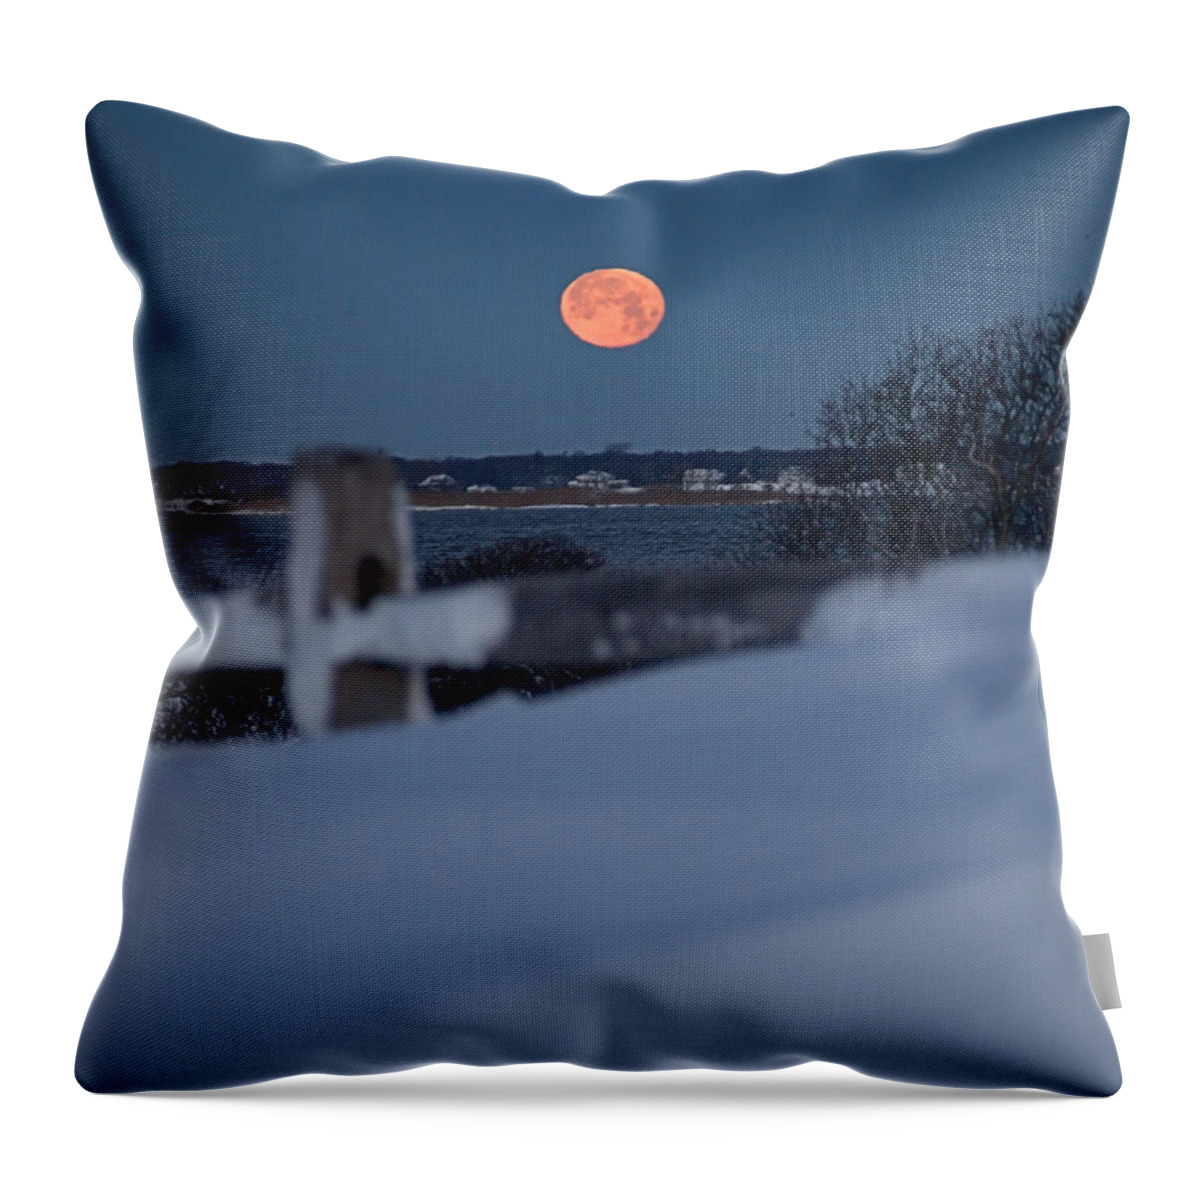 Wolf Moon Throw Pillow featuring the photograph Wolf Moon by Newwwman